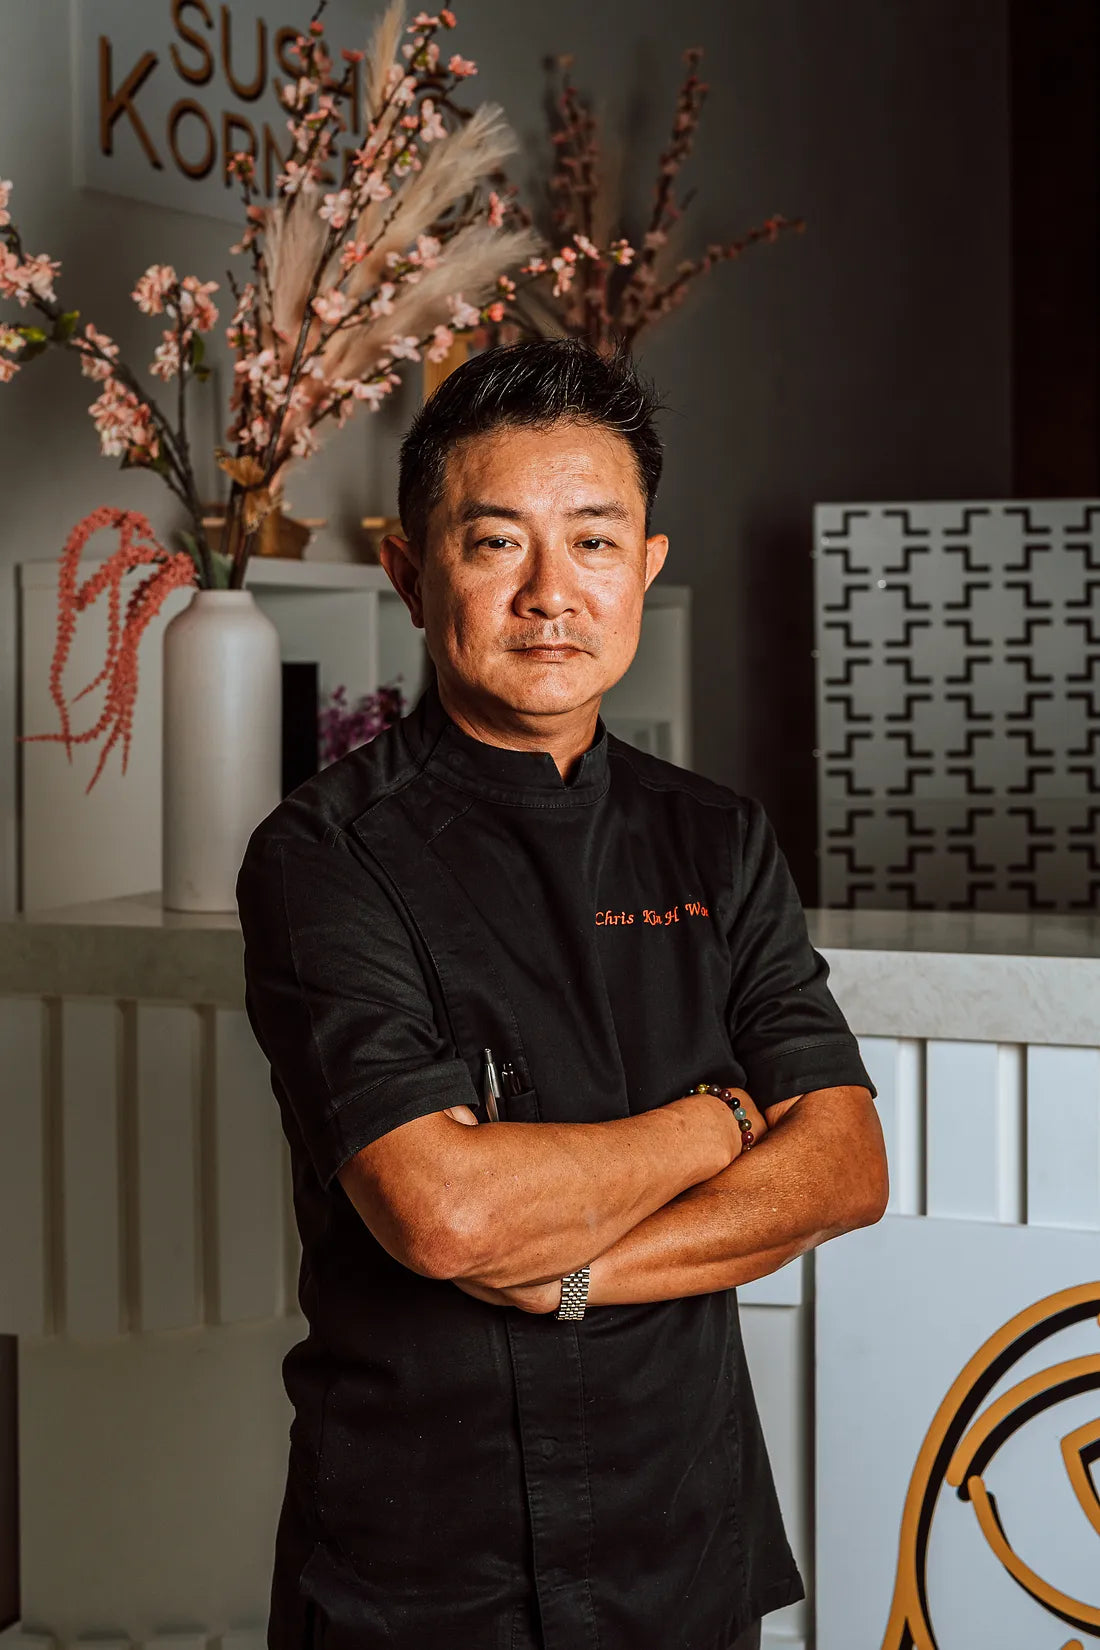 Chef Chris Wong Of Nautilus Sonesta Miami Beach: 5 Things I Wish Someone Told Me Before I Became a Chef